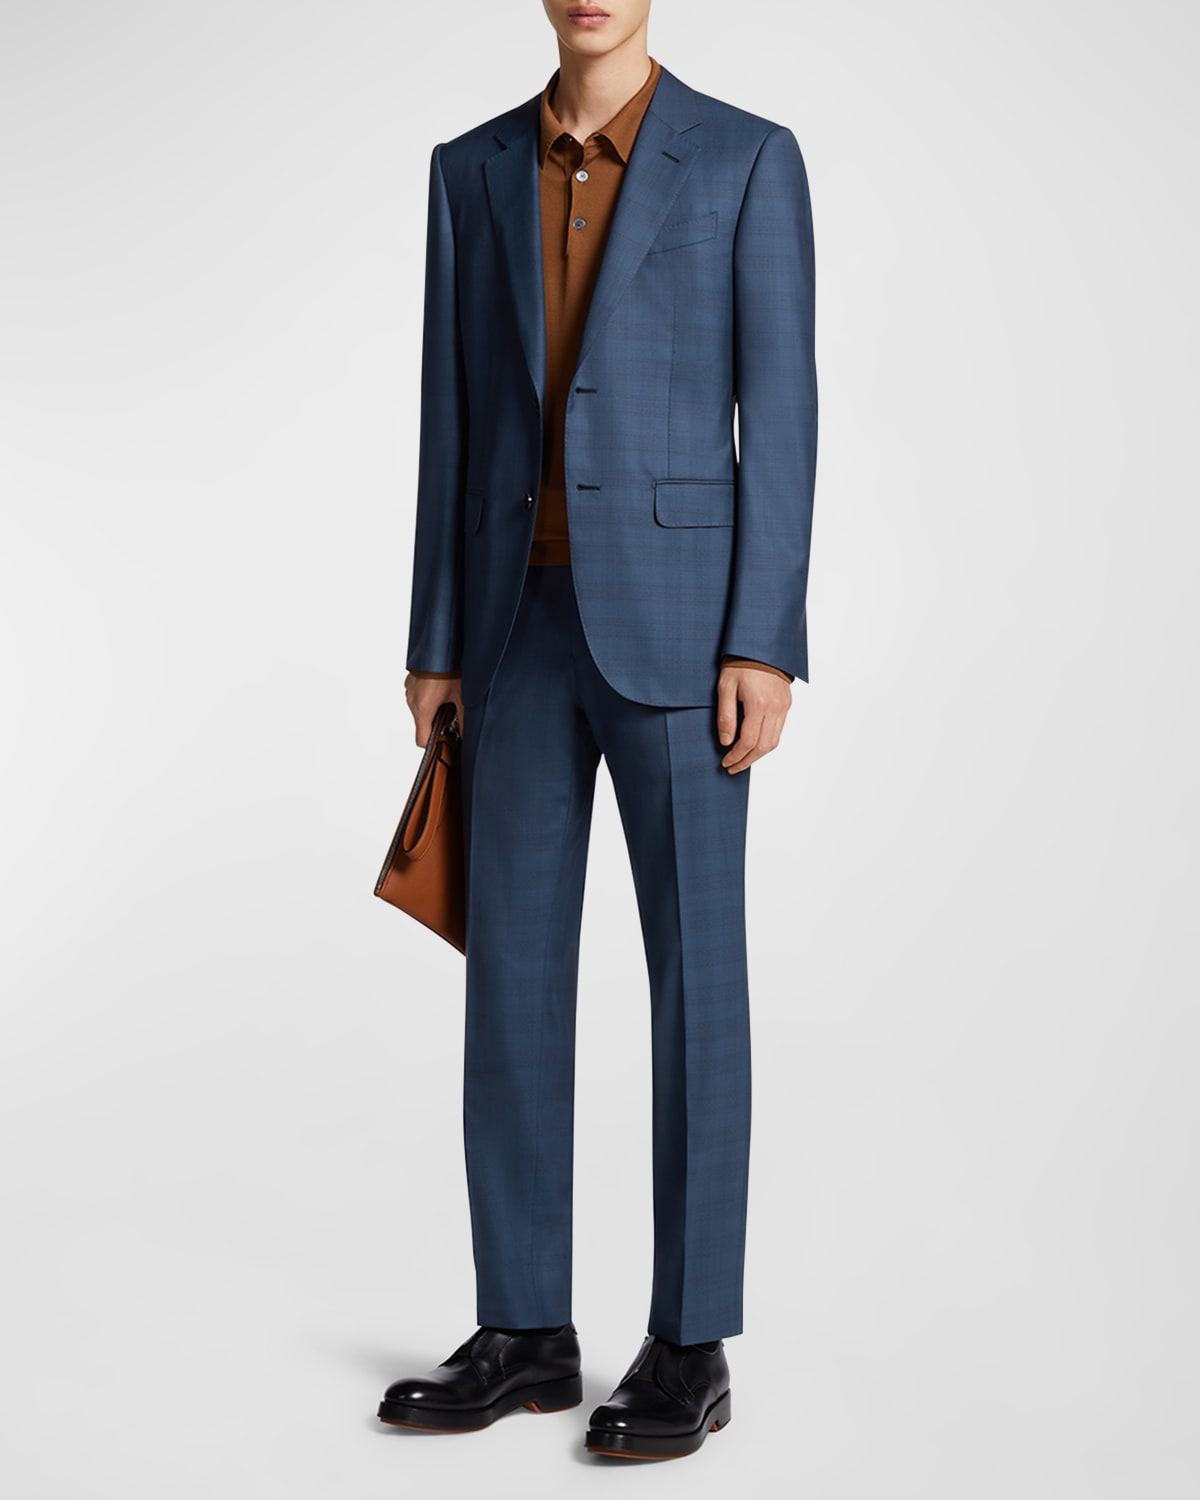 Zegna Prince Of Wales Plaid Centoventimila Wool Suit In Blue Navy Check